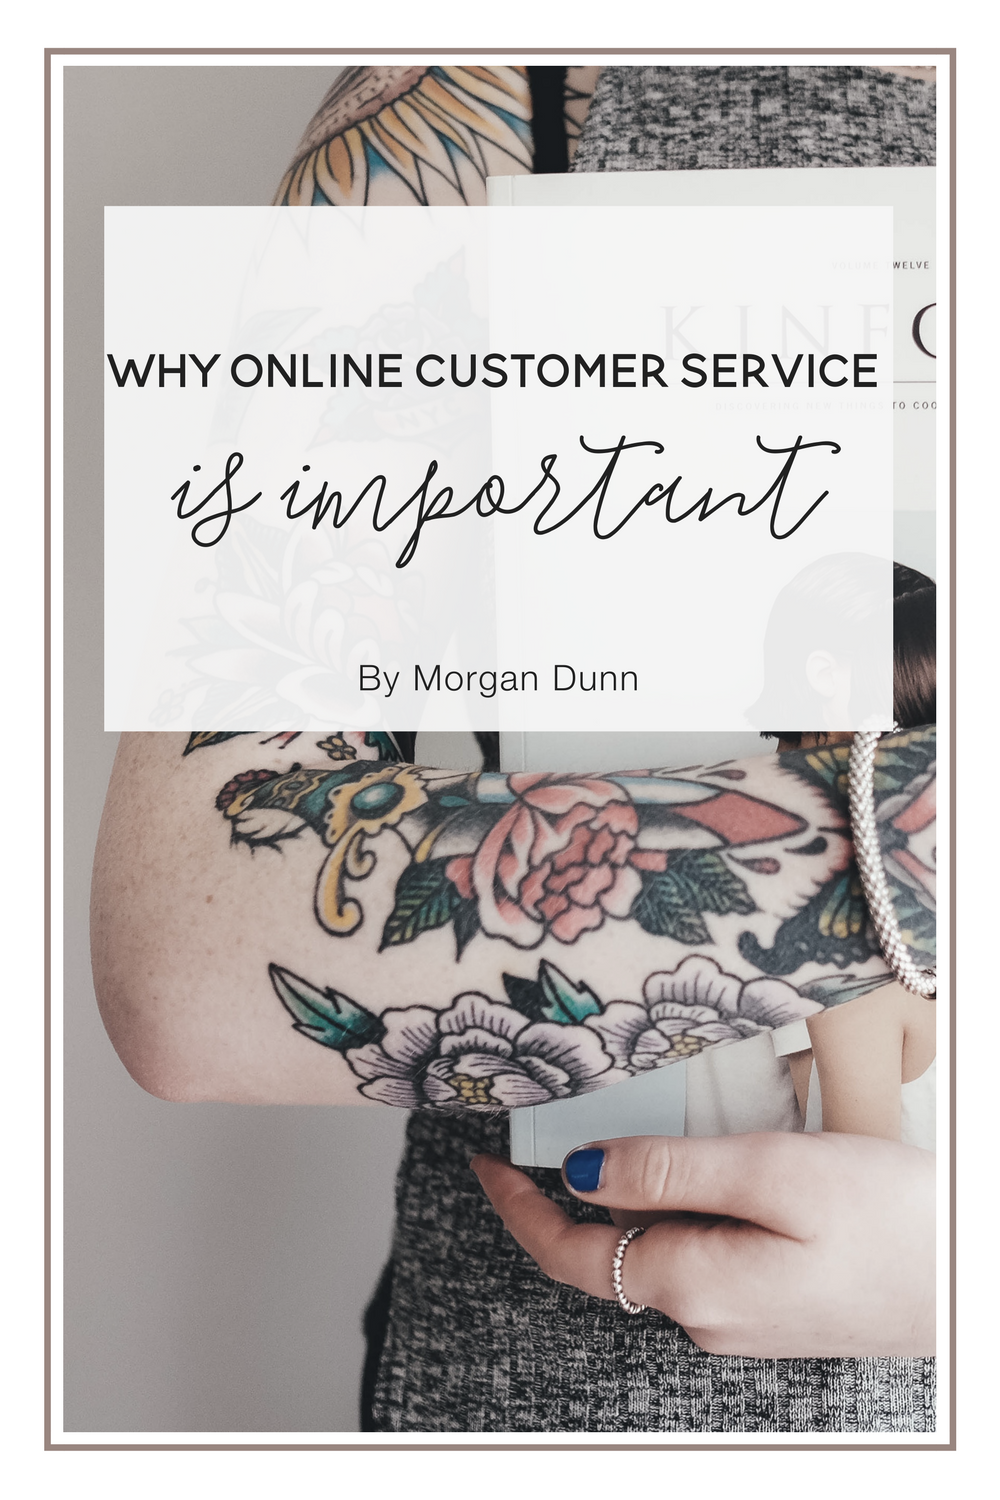 Why Online Customer Service is important